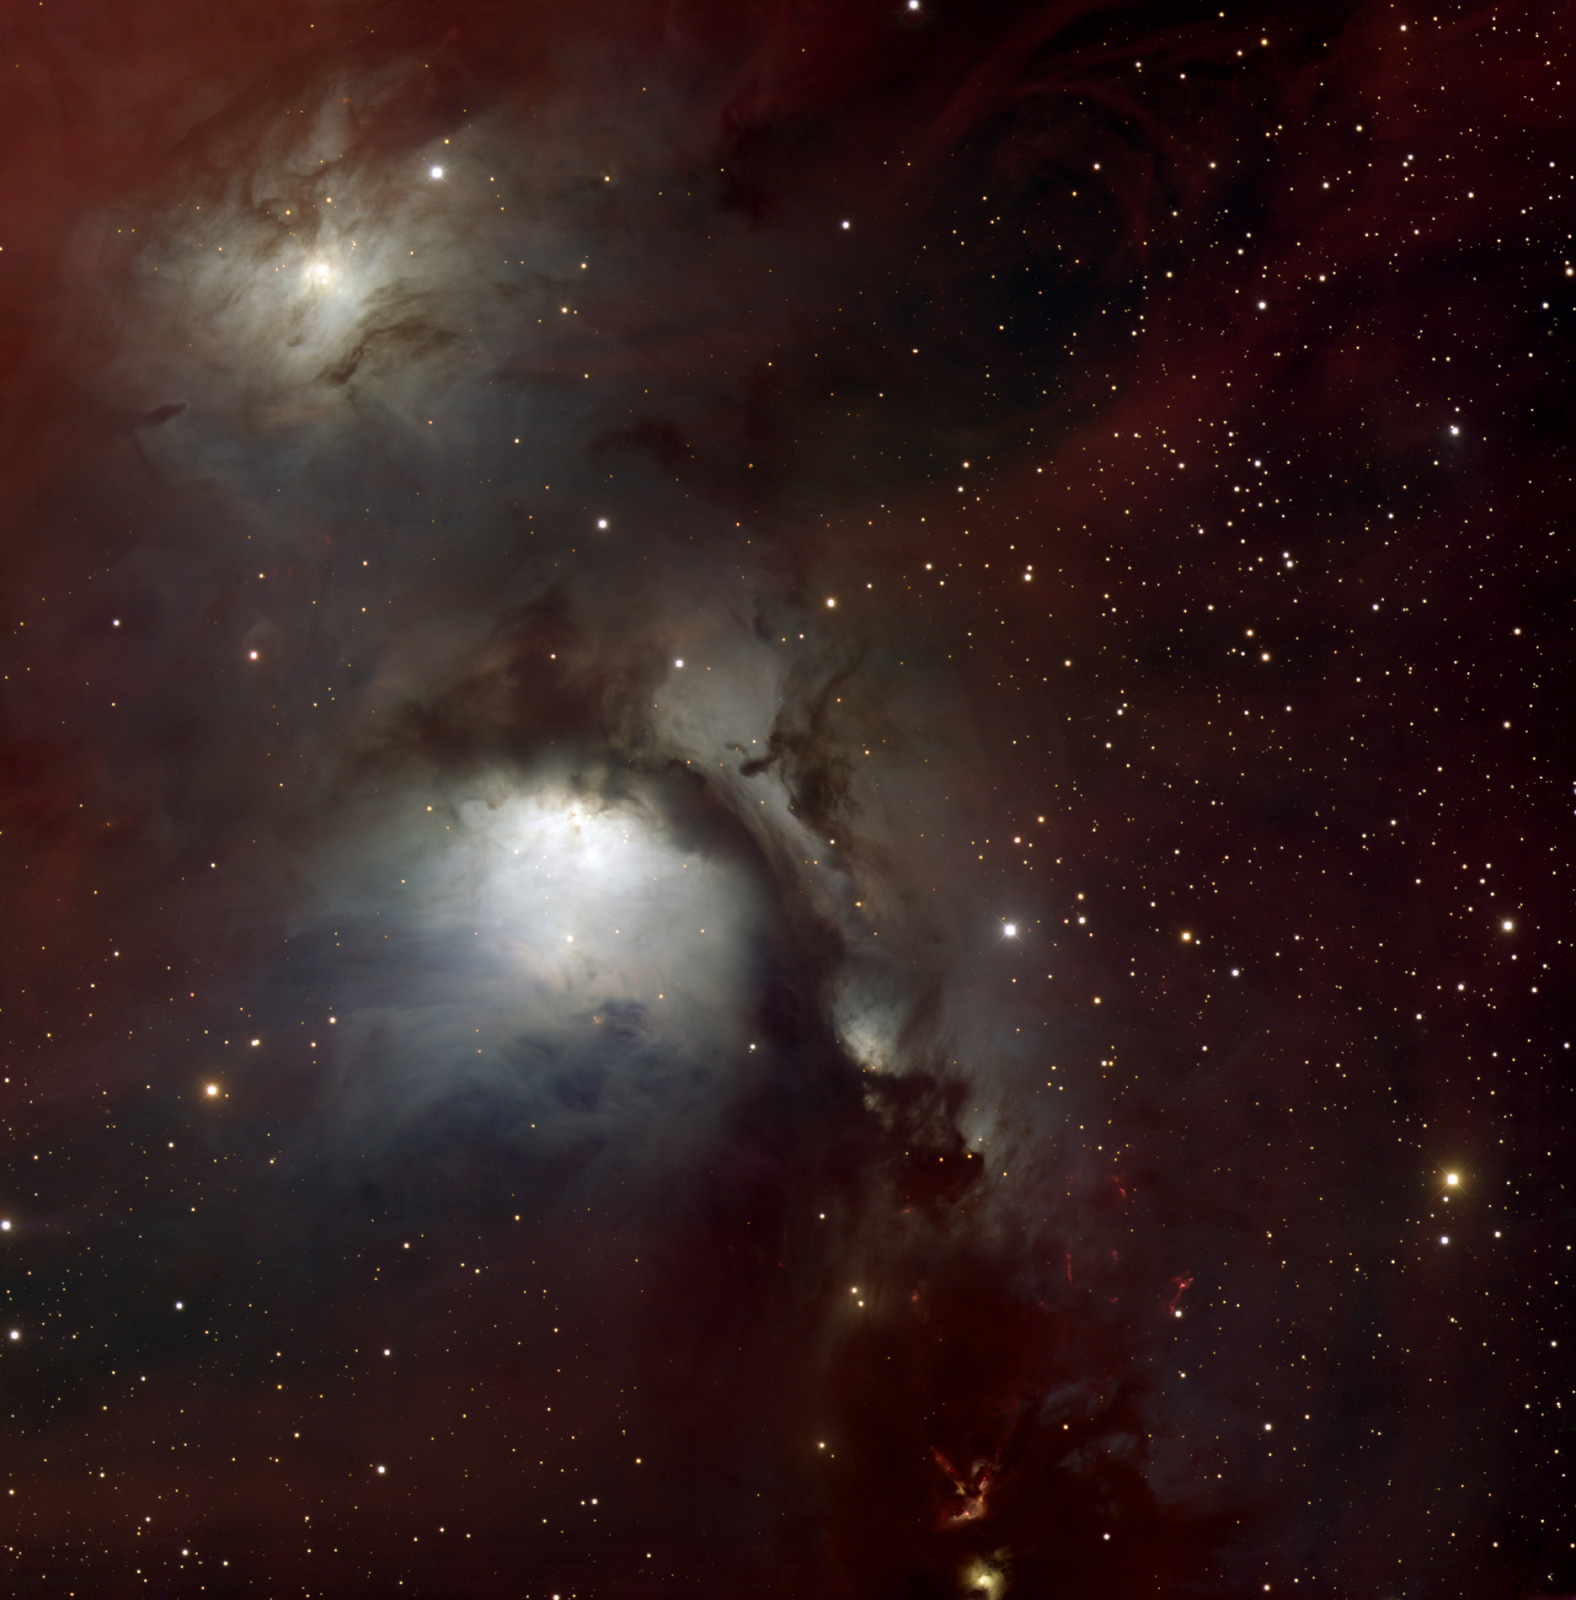 Reflection Nebulas in Orion